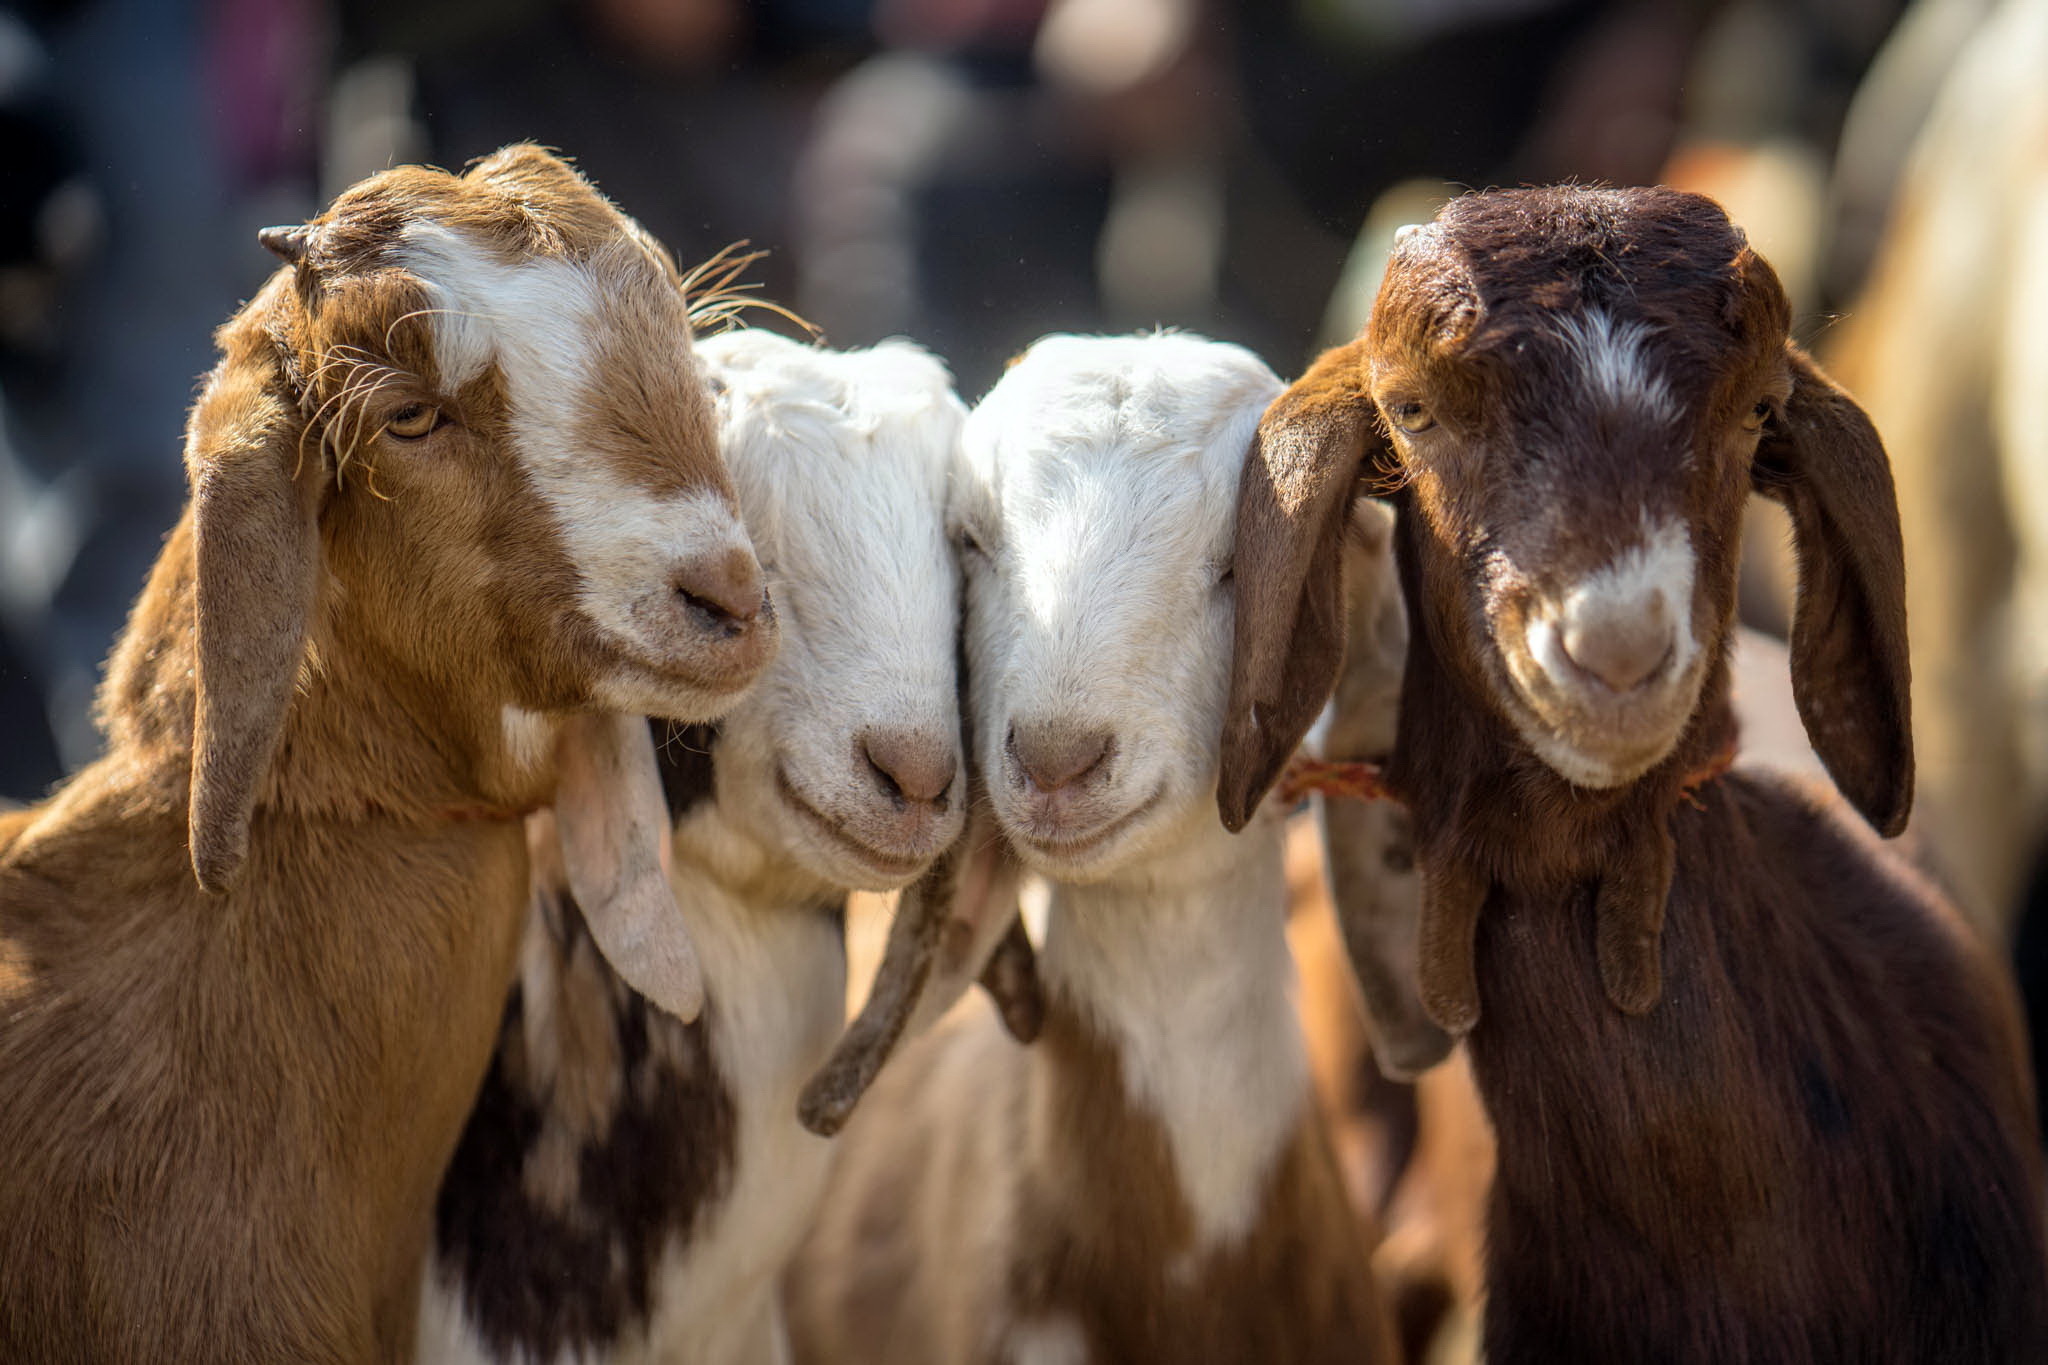 humpday pic of four goats